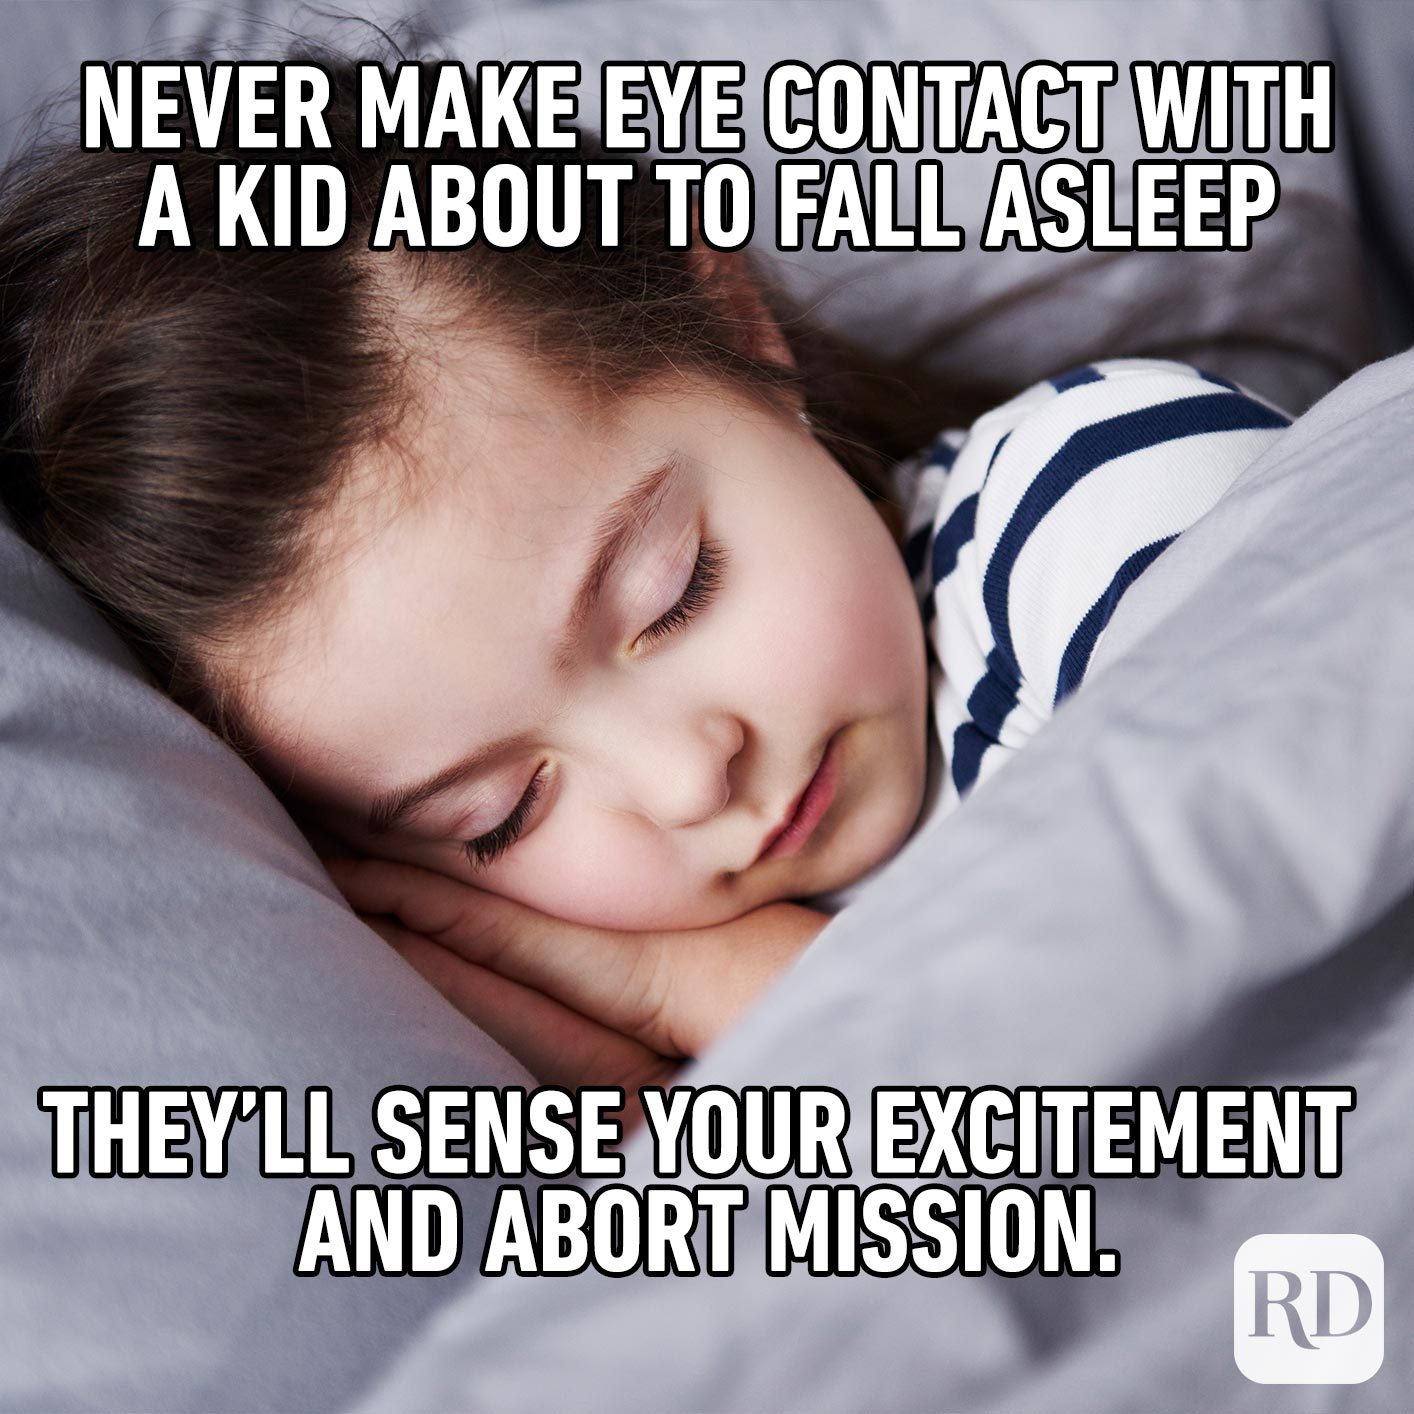 Child in bed. MEME TEXT: Never make eye contact with a kid about to fall asleep—they'll sense your excitement and abort mission.